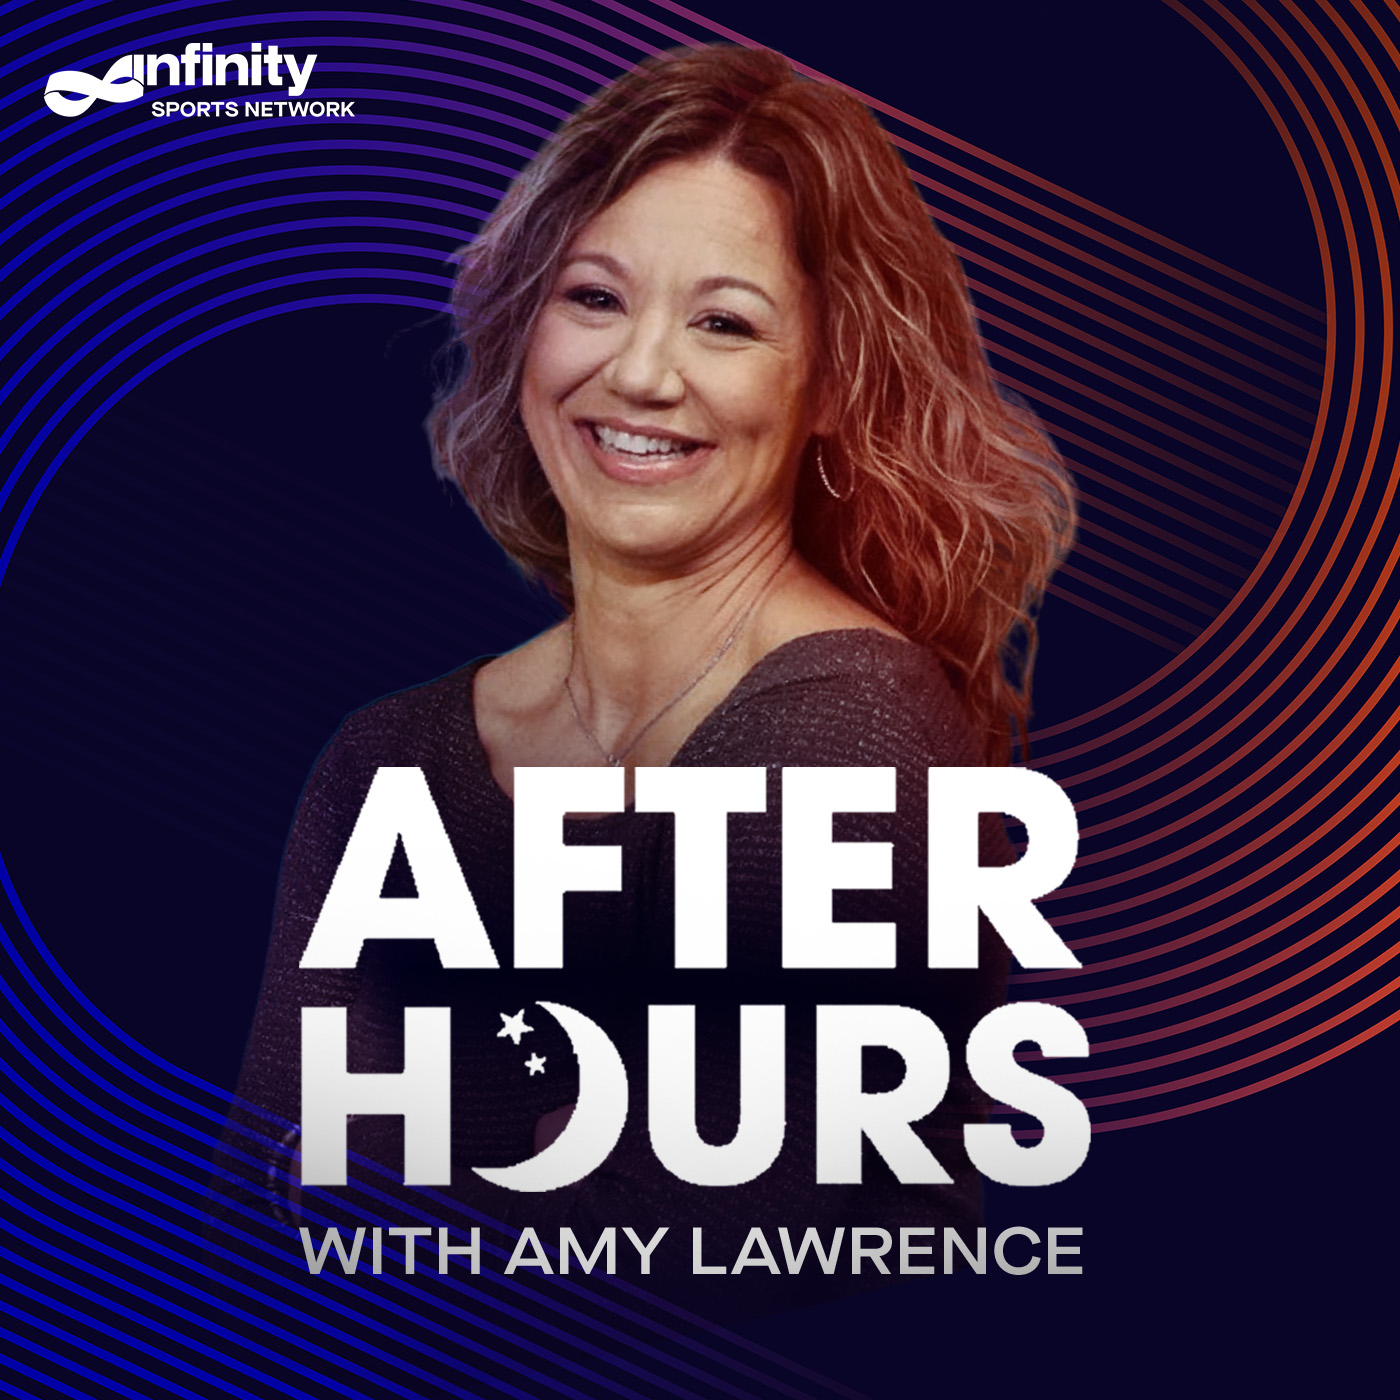 11-23-21 After Hours with Amy Lawrence PODCAST: Hour 2